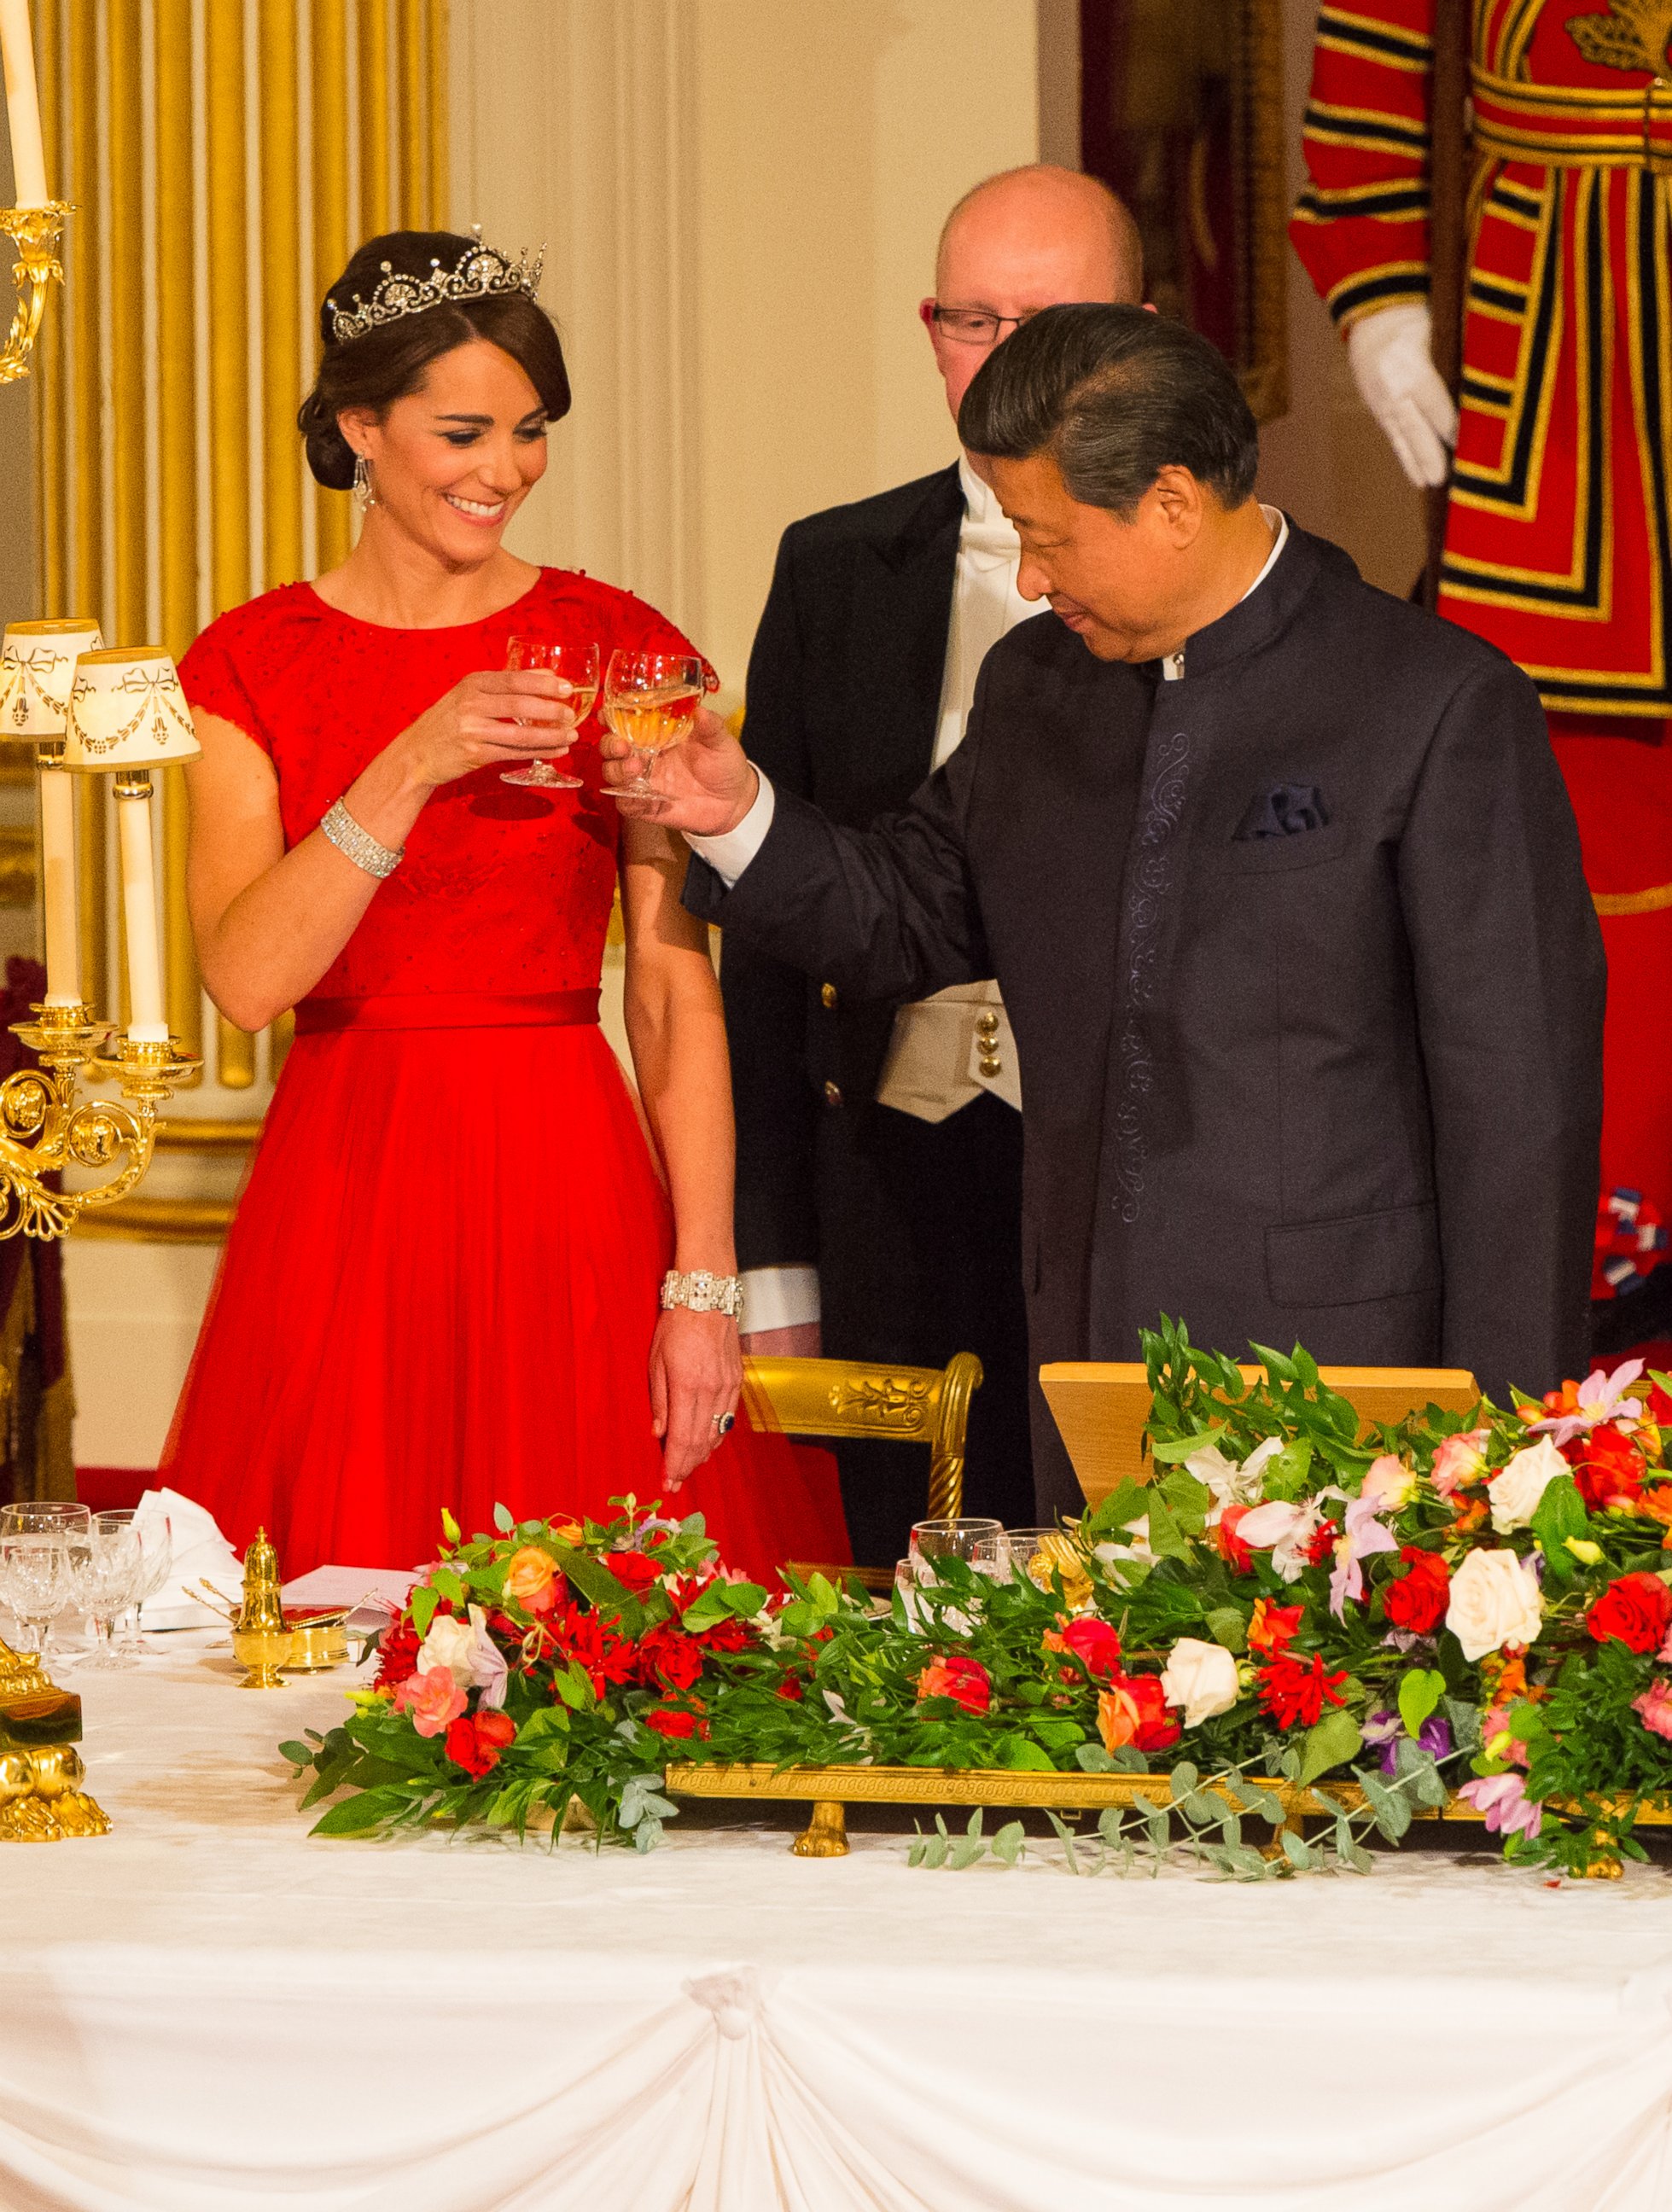 PHOTO: Chinese President Xi Jinping and Catherine, Duchess of Cambridge attend a state banquet at Buckingham Palace on October 20, 2015 in London, England.